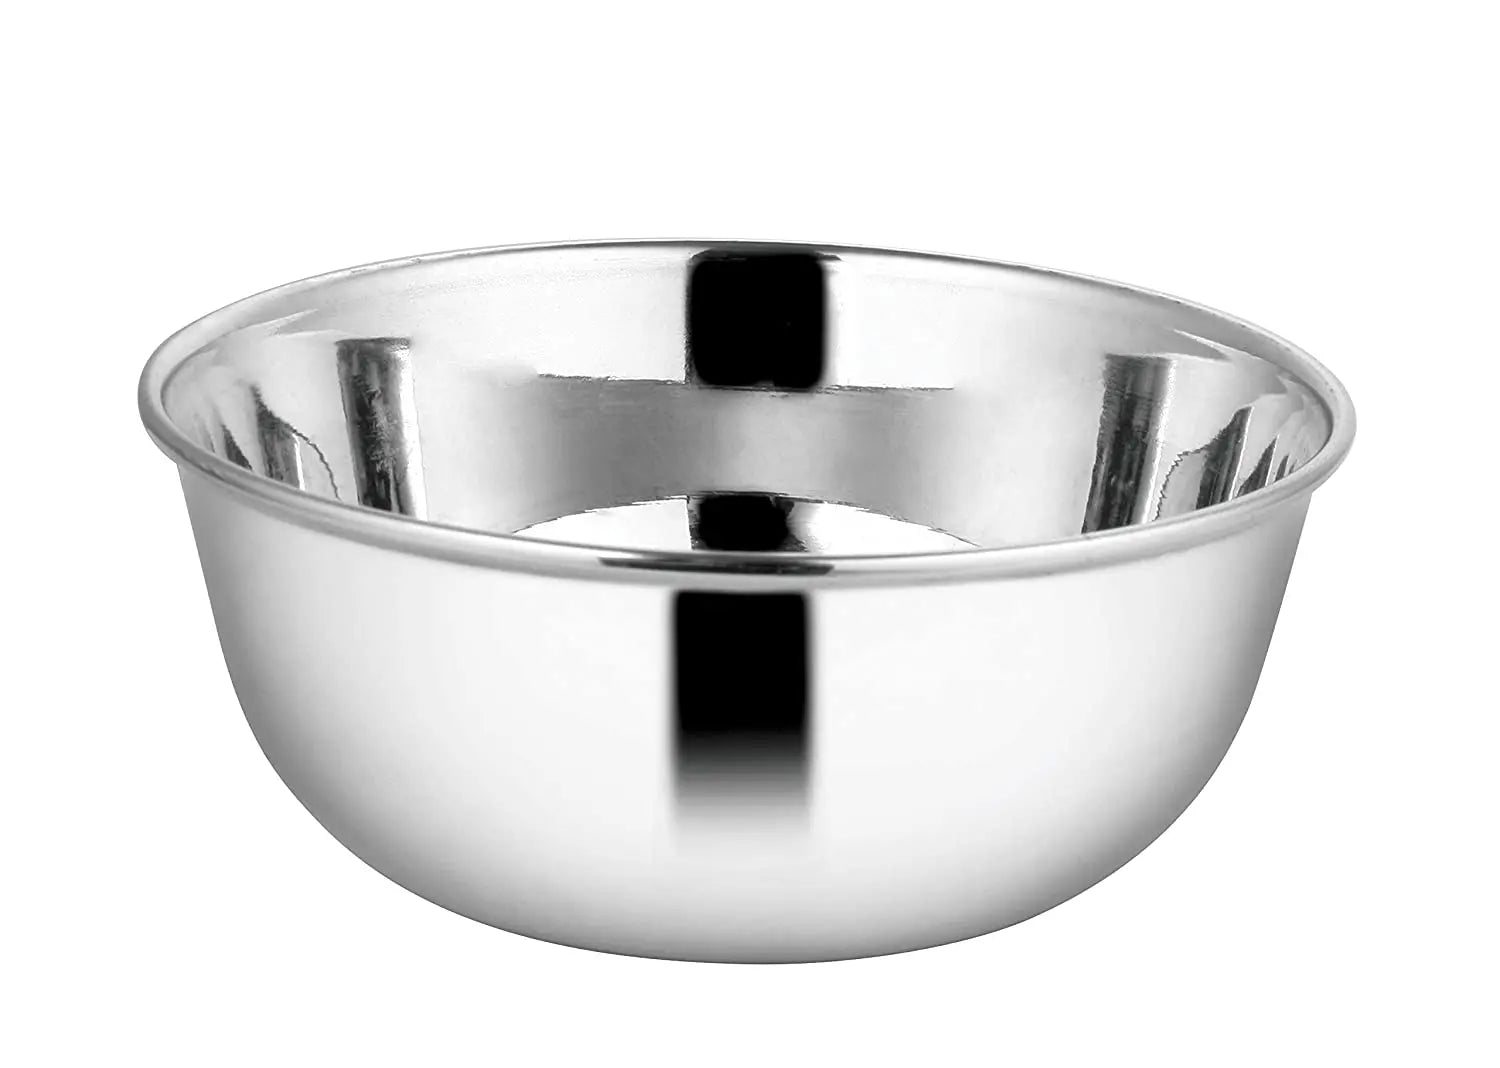 Crockery Wala And Company Stainless Steel Bowl Katori With Laser Finish Food Grade Material Bowl 4" Inch - 6 Pcs - CROCKERY WALA AND COMPANY 